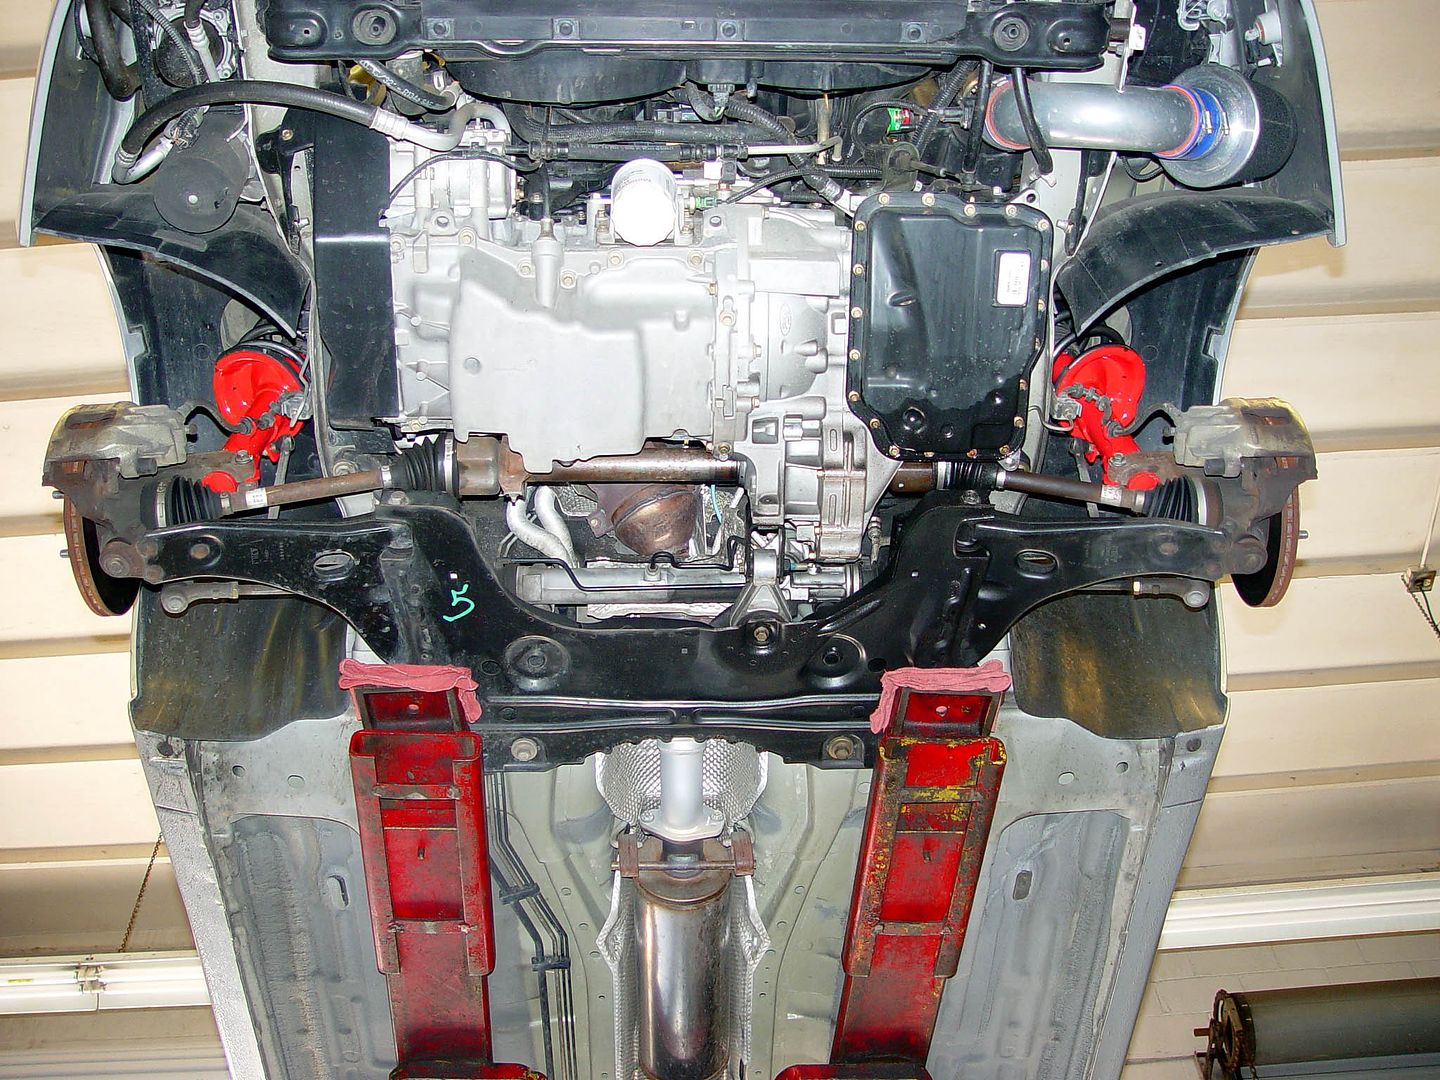 2000 Ford focus undercarriage #1